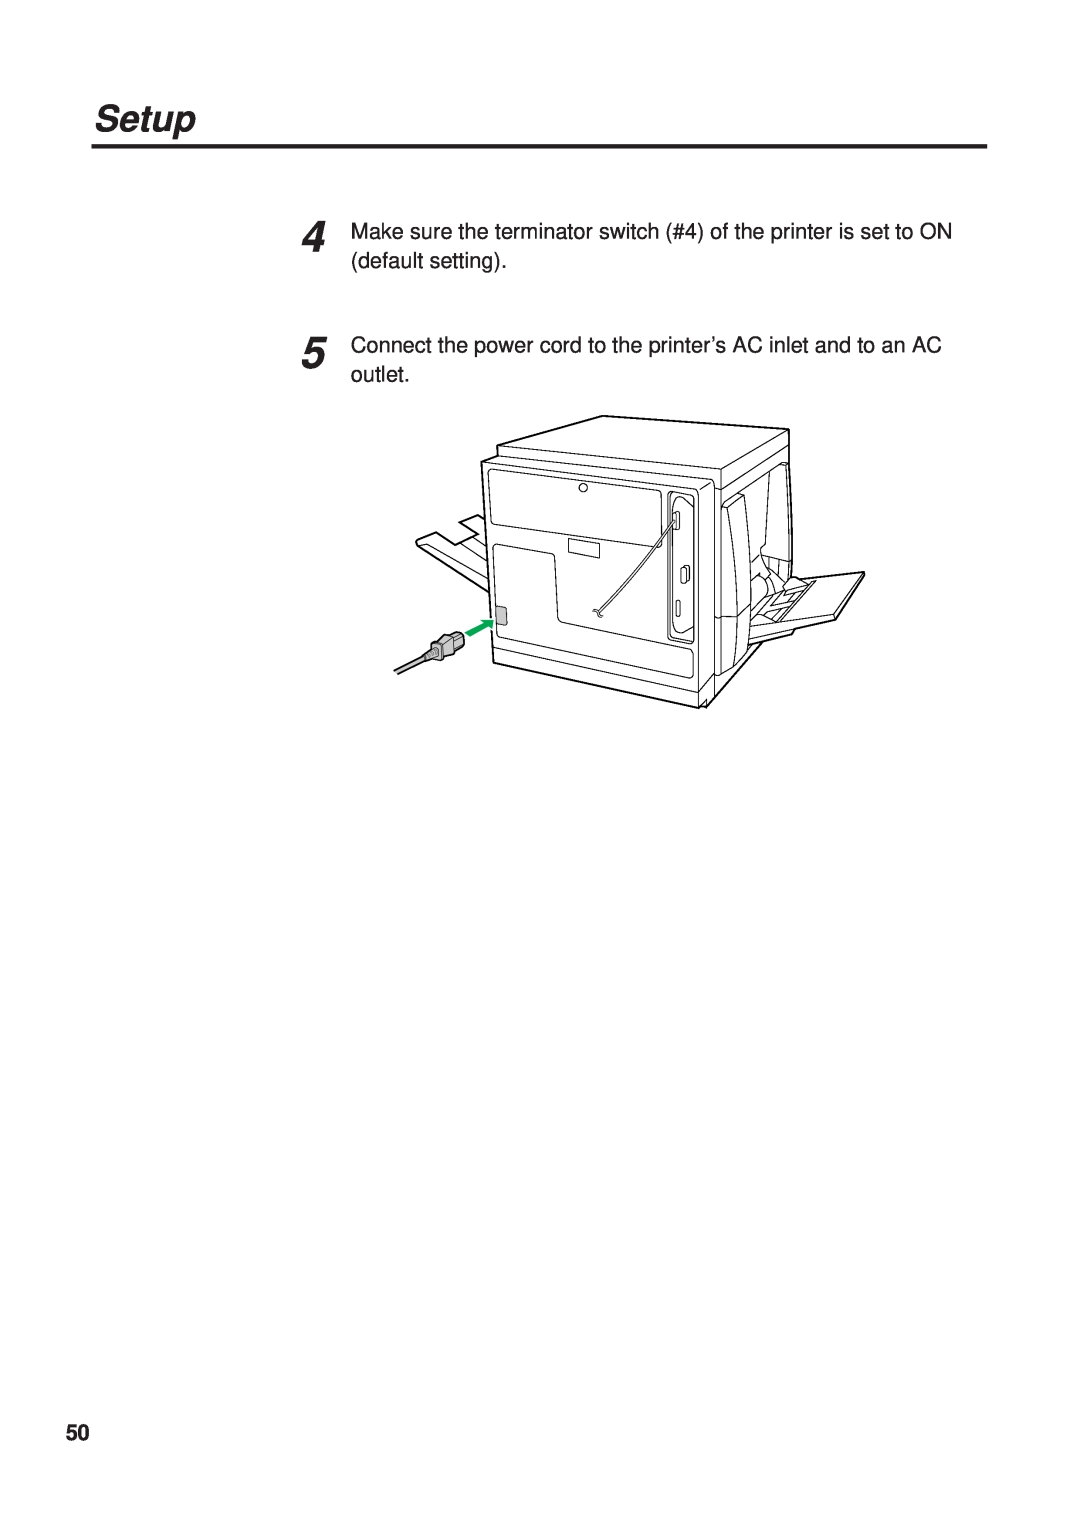 Panasonic KX-PS8000 manual Make sure the terminator switch #4 of the printer is set to ON, default setting, Setup, outlet 